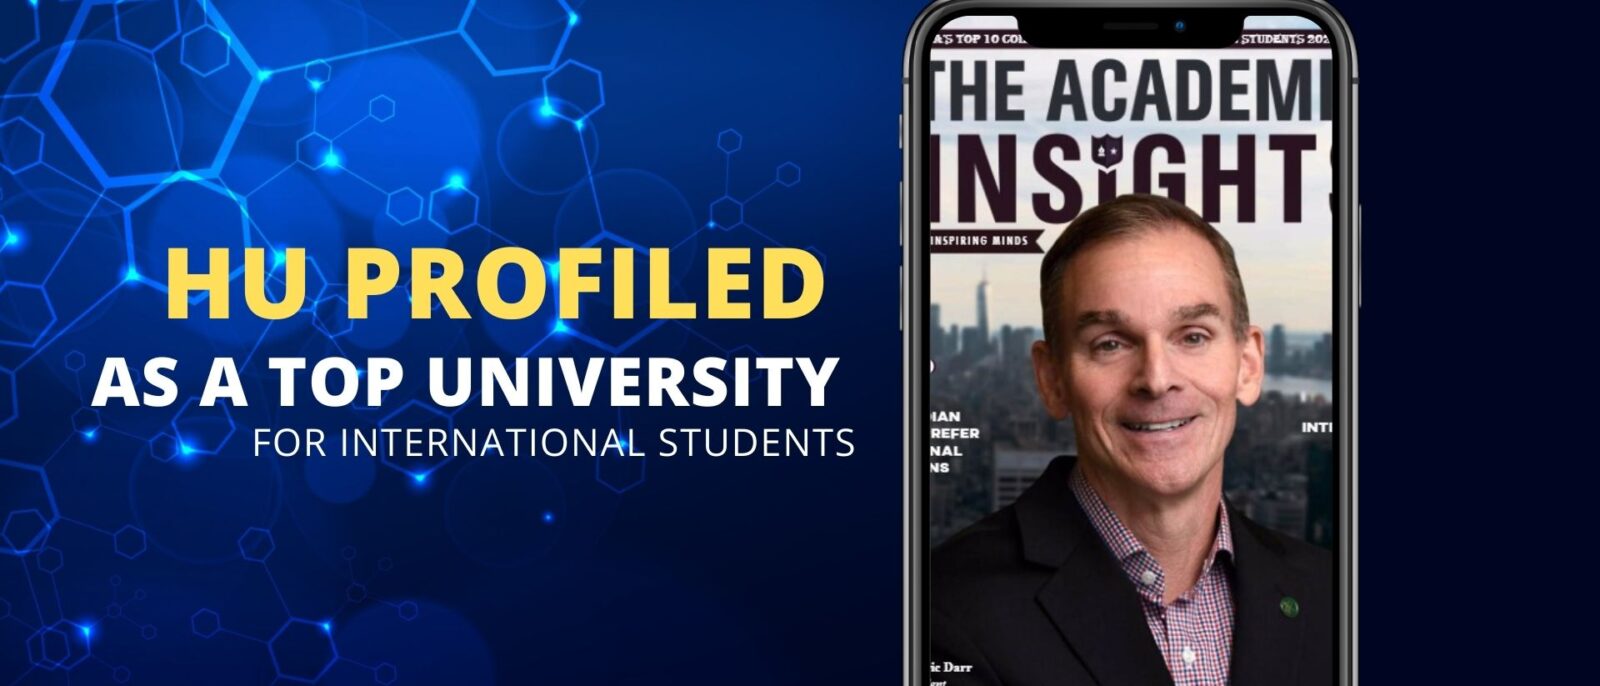 HU profiled as a top university for international students